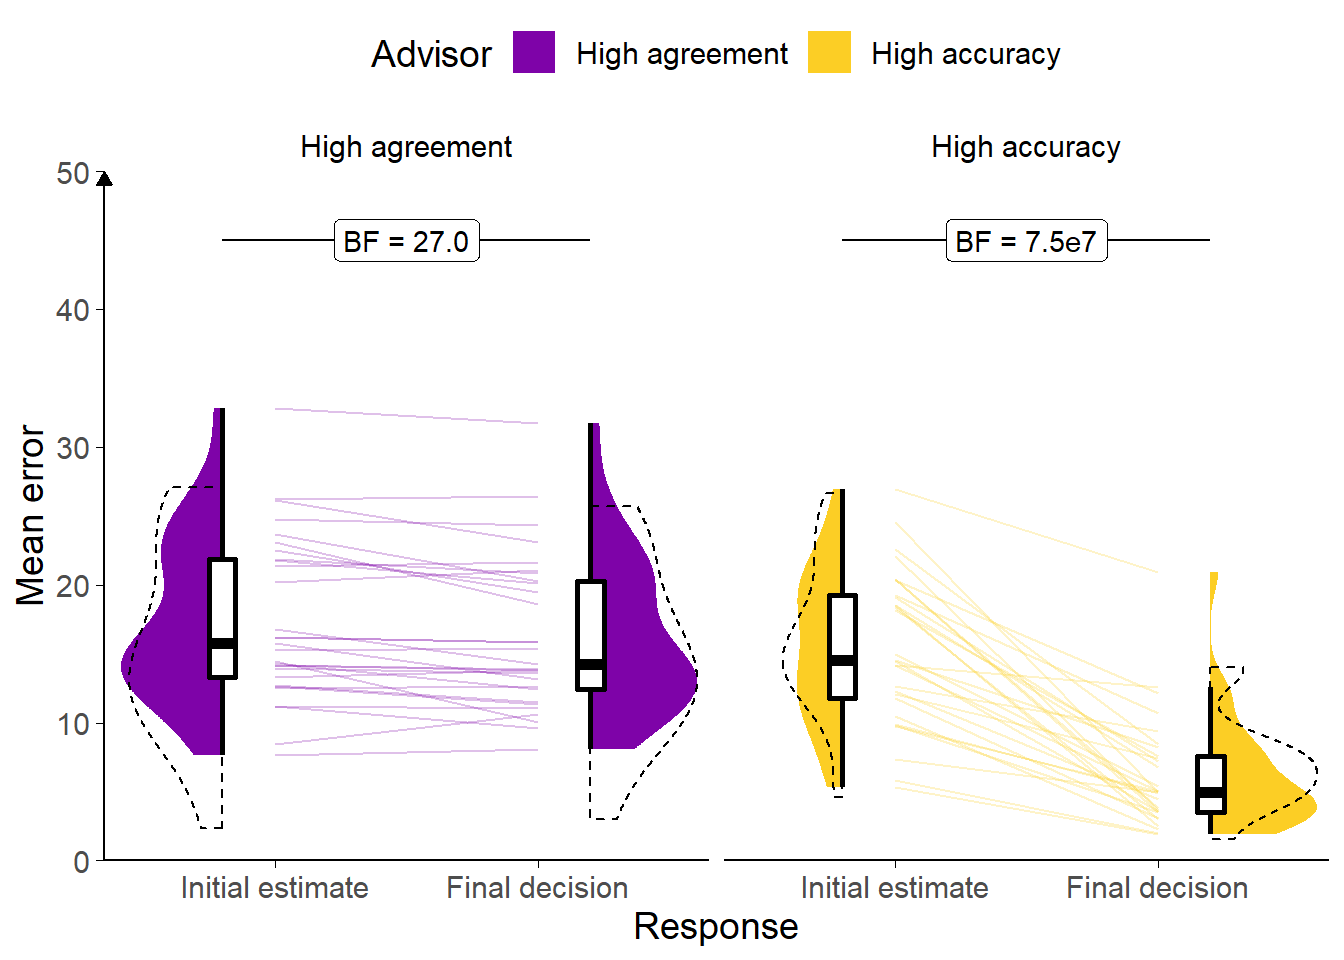 Response error for Experiment 0.<br/> Faint lines show individual participant mean error (the absolute difference between the participant's response and the correct answer), for which the violin and box plots show the distributions. The dashed line indicates chance performance. Dotted violin outlines show data from the original study which this is a replication. The dependent variable is error, the distance between the correct answer and the participant's answer; lower values represent better performance. The theoretical limit for error is around 100.